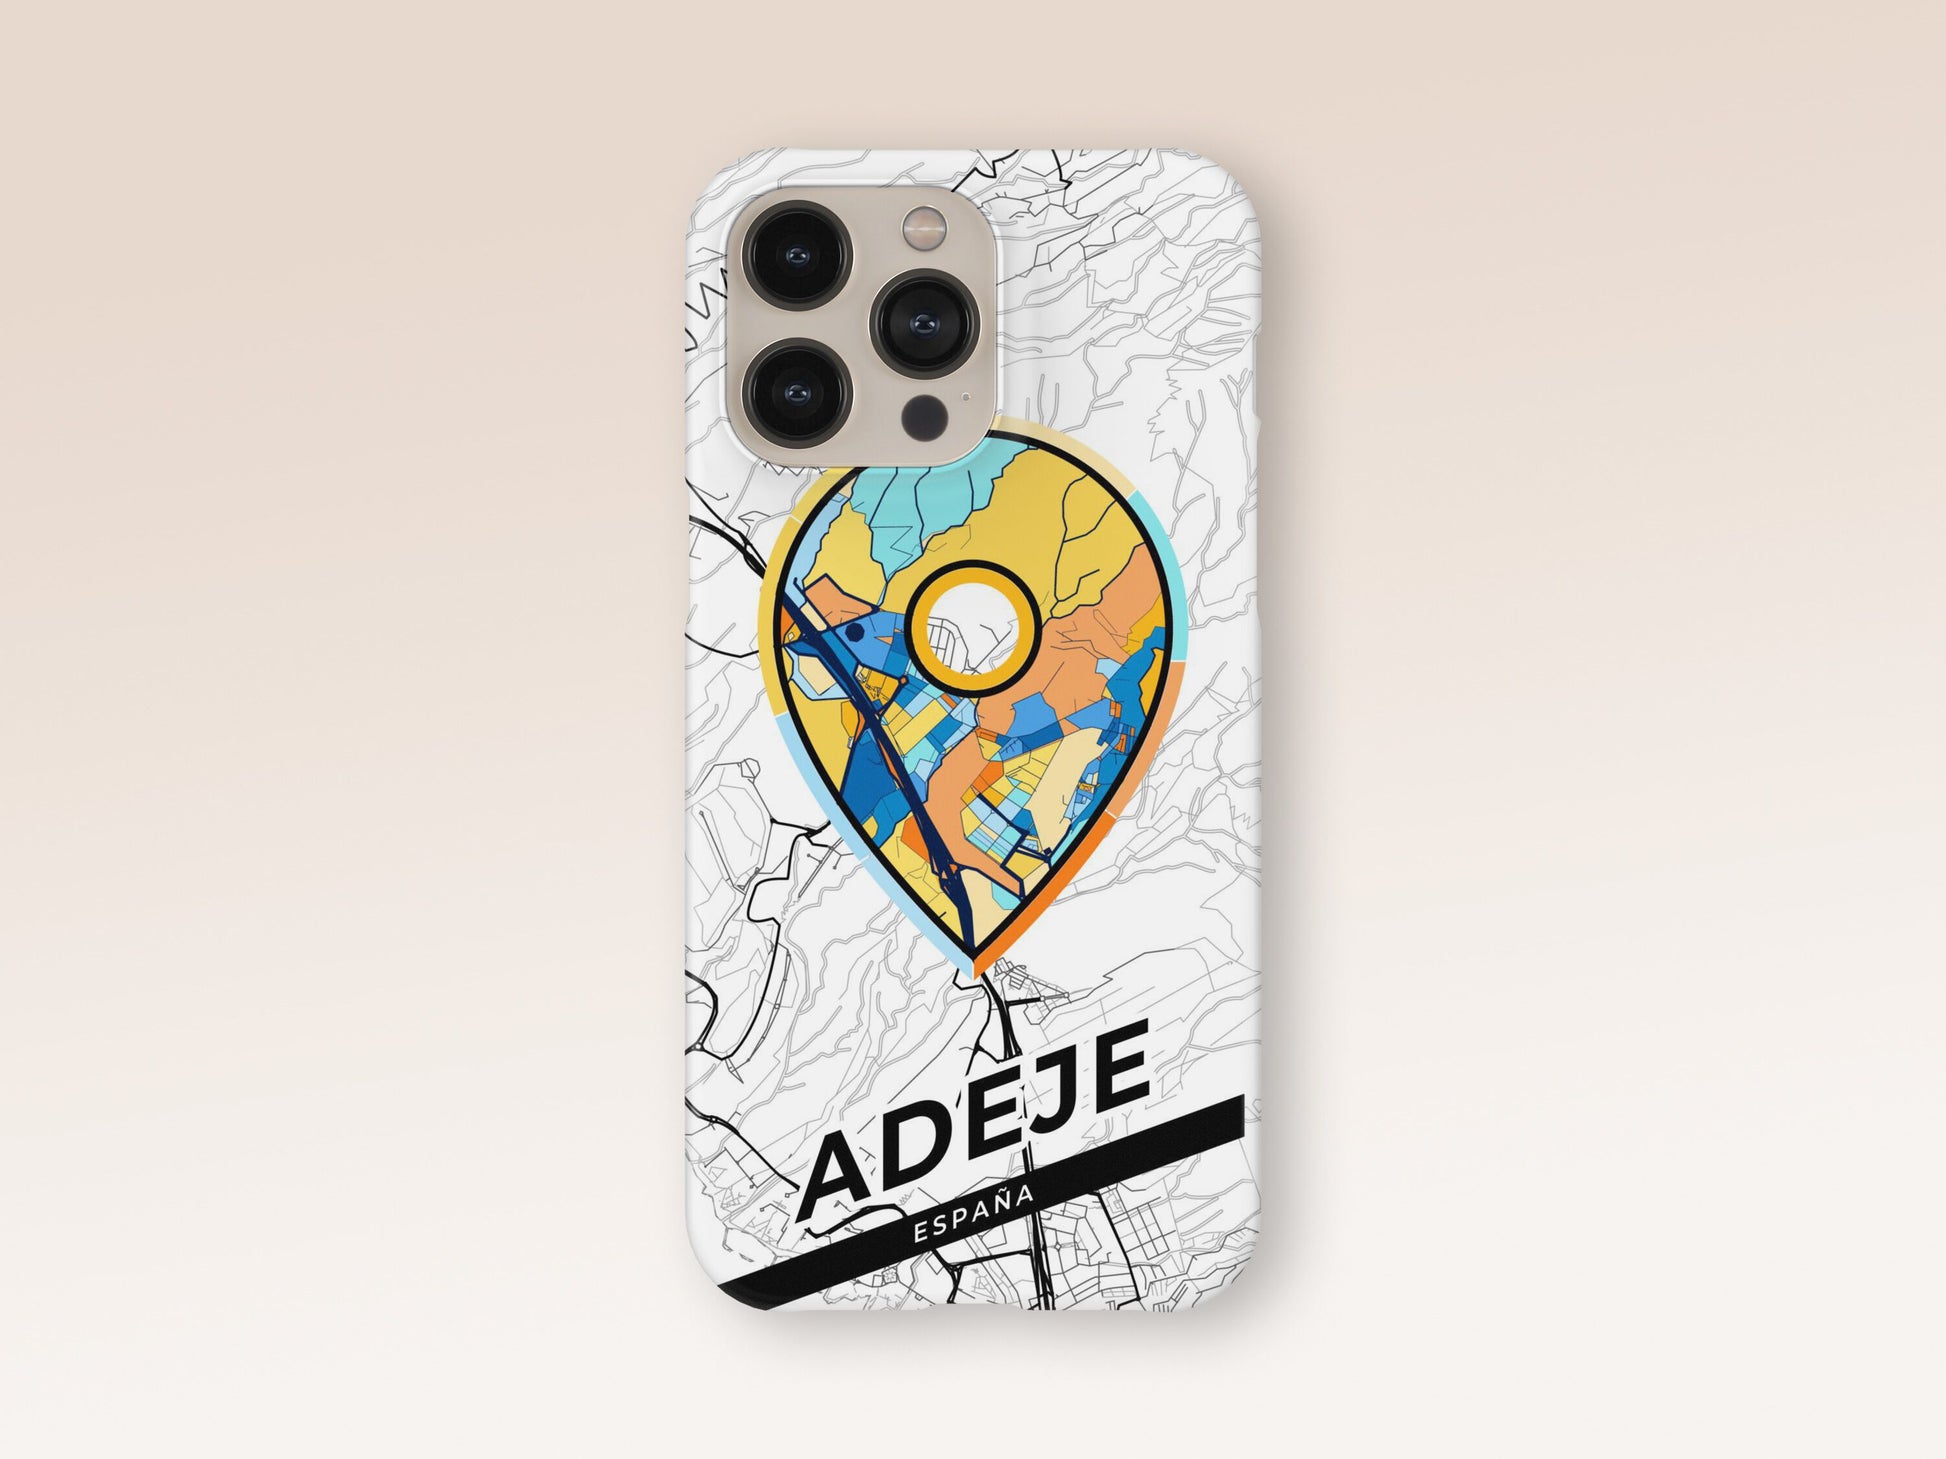 Adeje Spain slim phone case with colorful icon. Birthday, wedding or housewarming gift. Couple match cases. 1